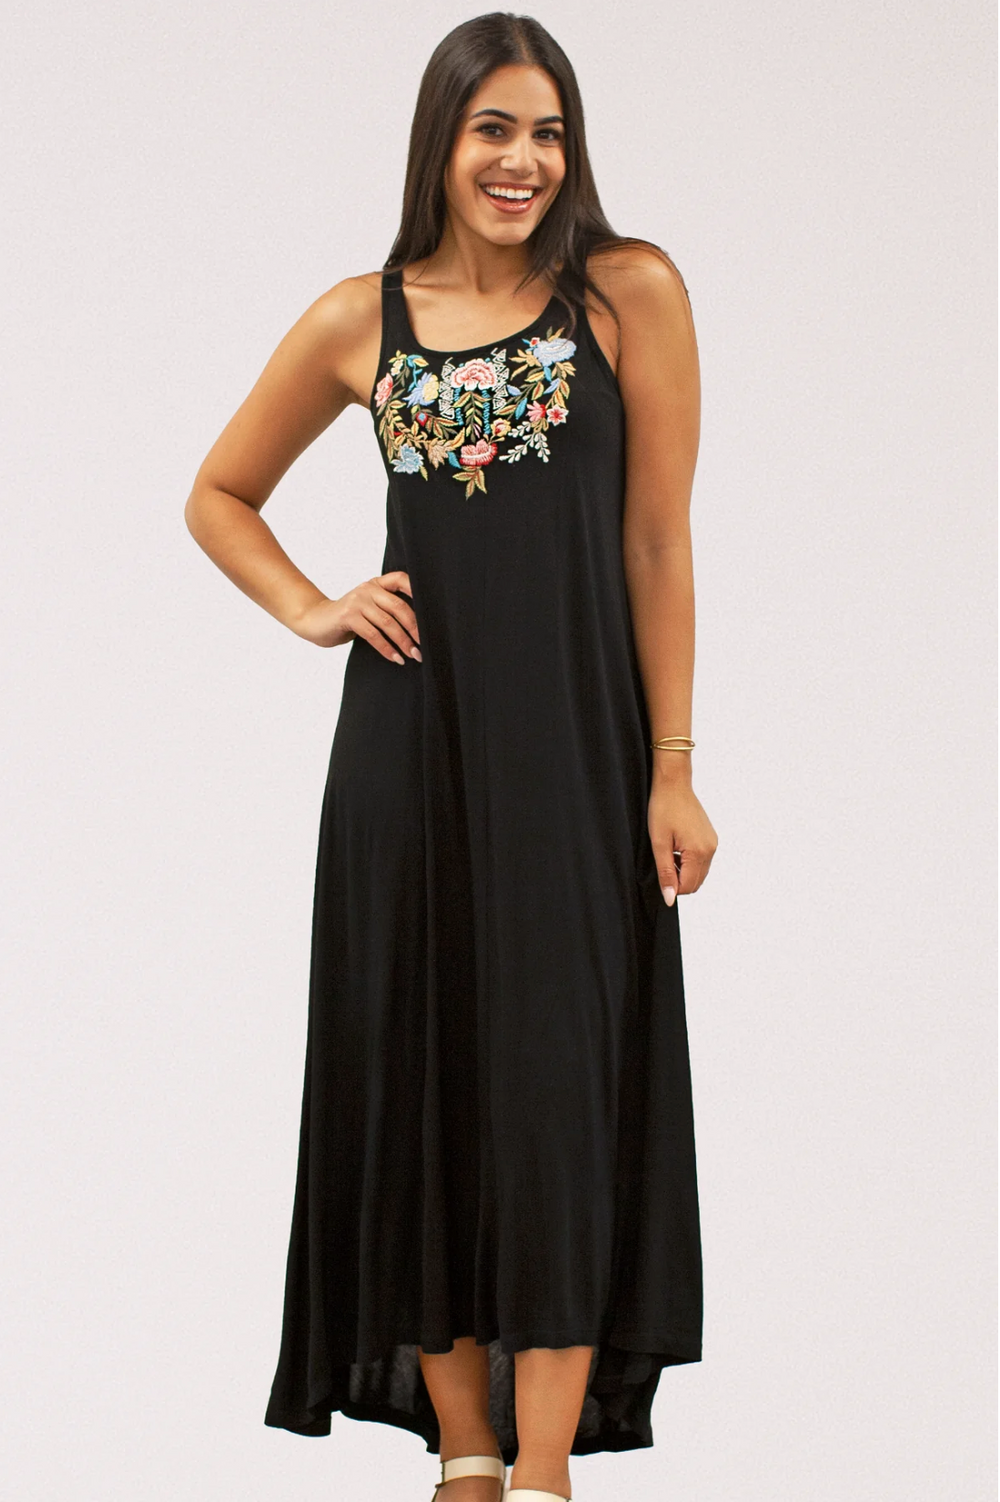 Caite Jules dress, embroidered maxi